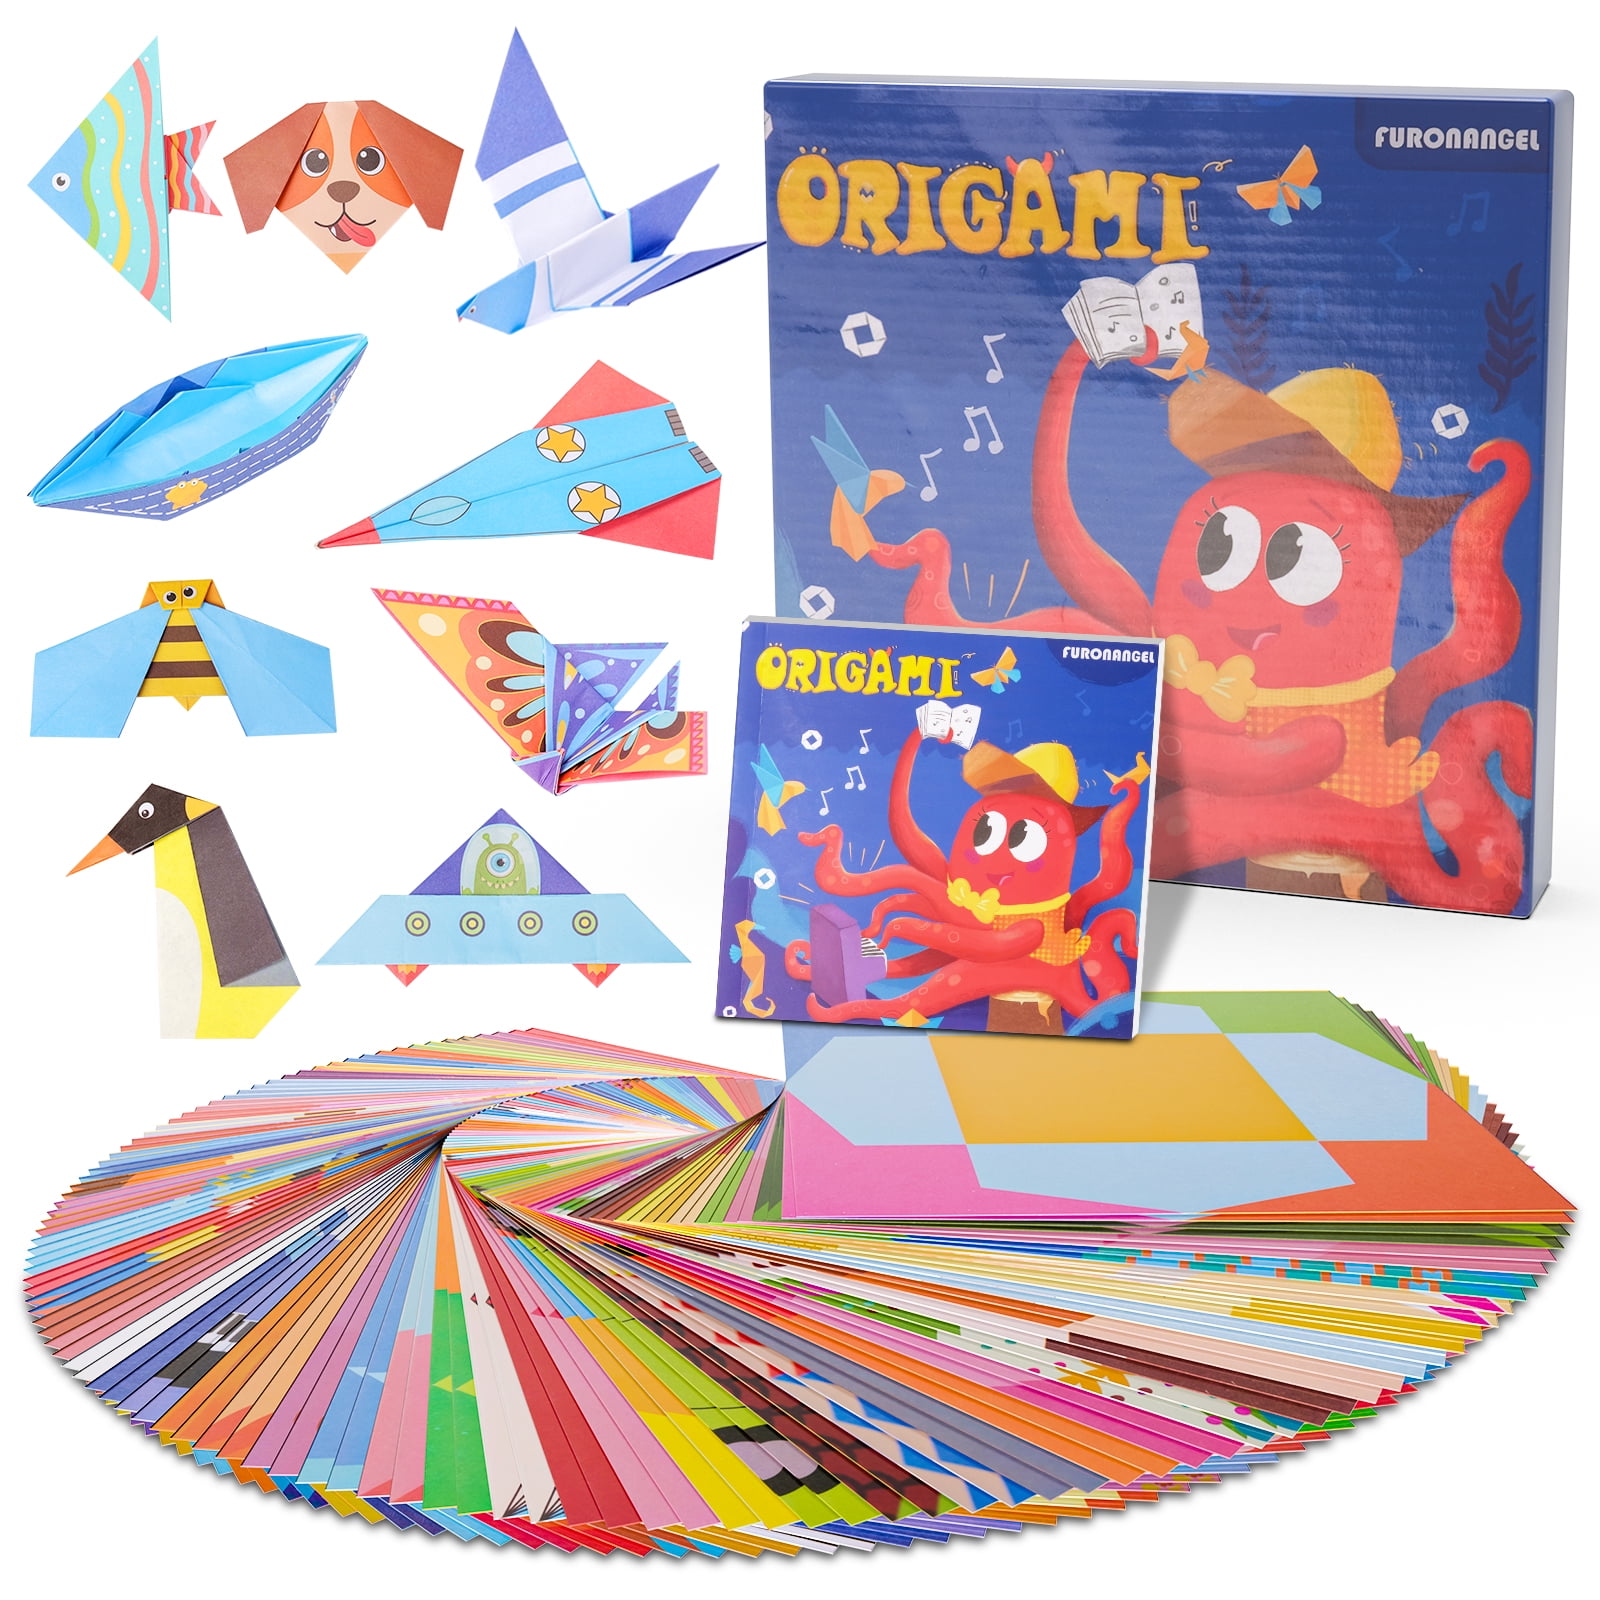  hapray Origami Kit for Kids Ages 5-8 8-12, with